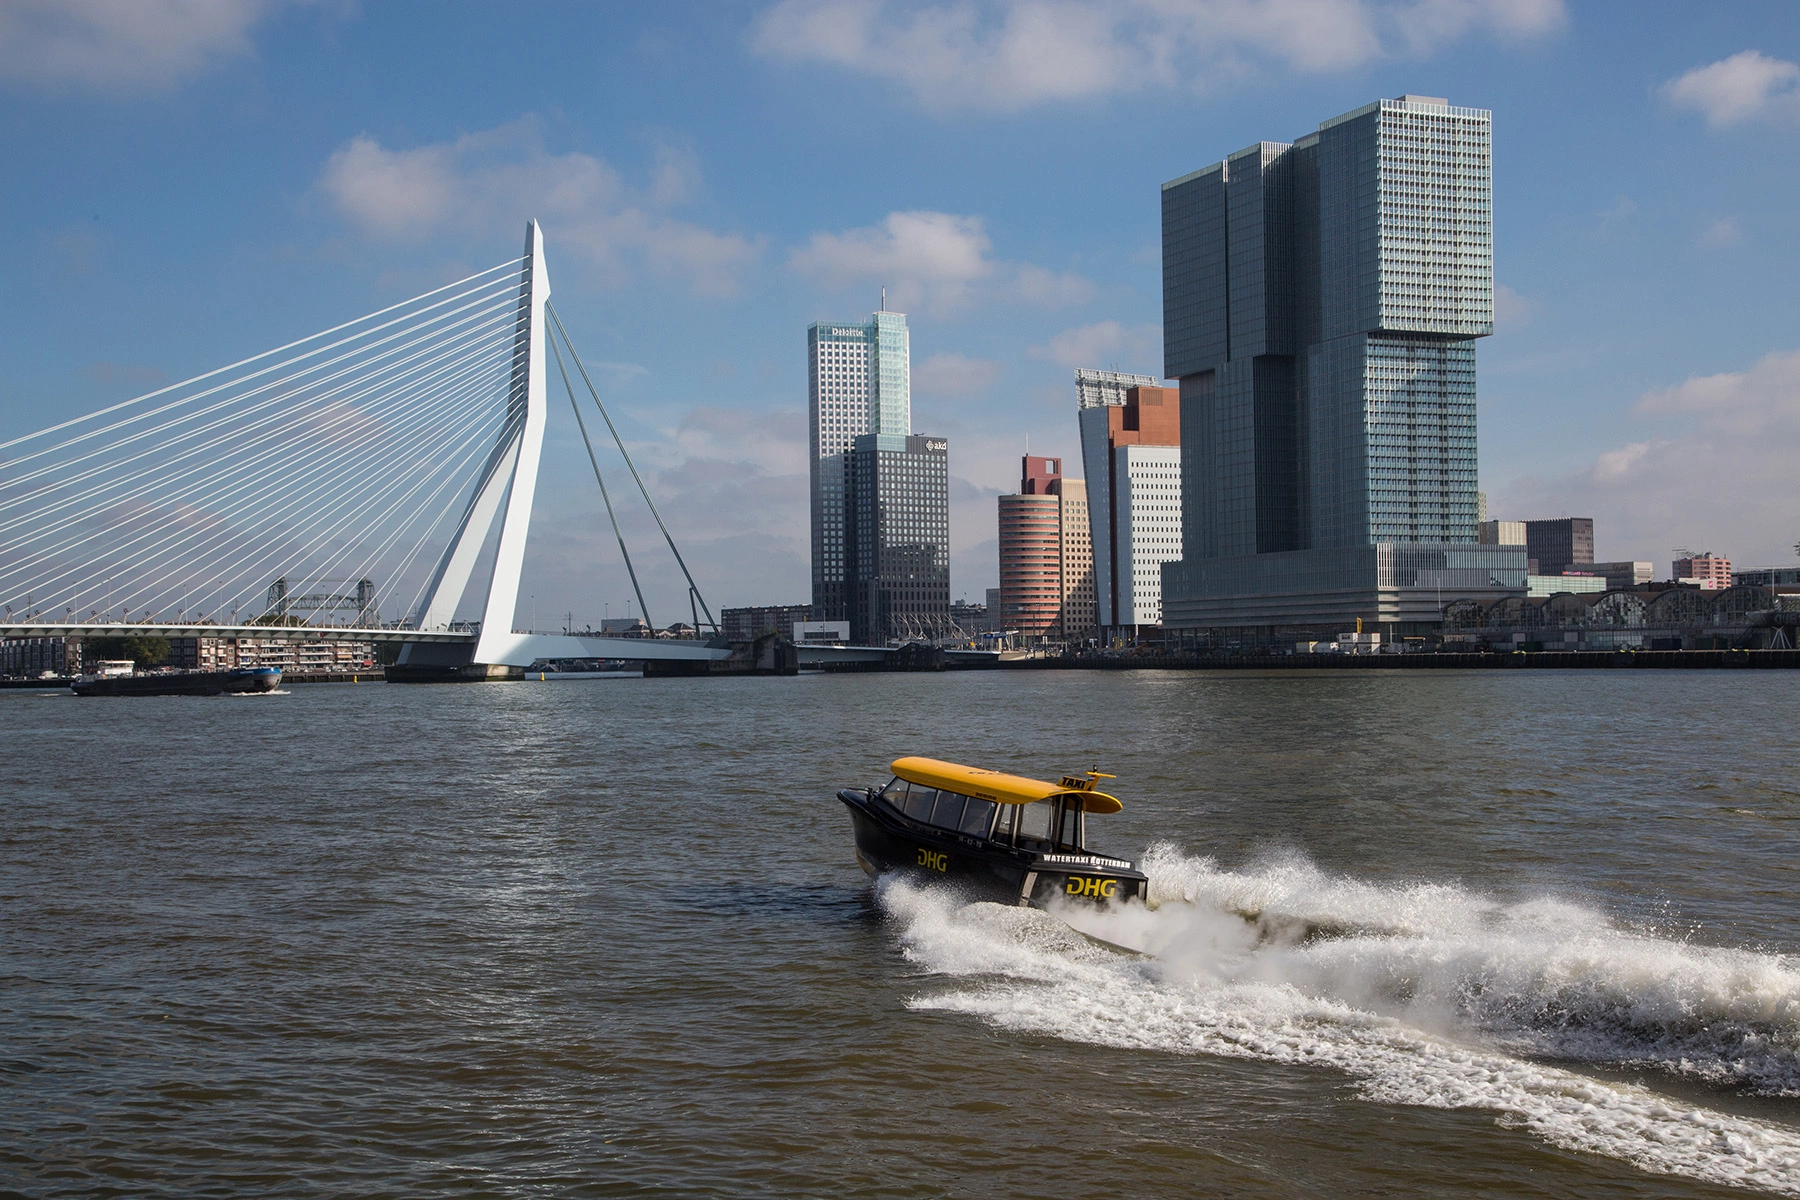 A water taxi speeds towards the Erasmusbrug in Rotterdam